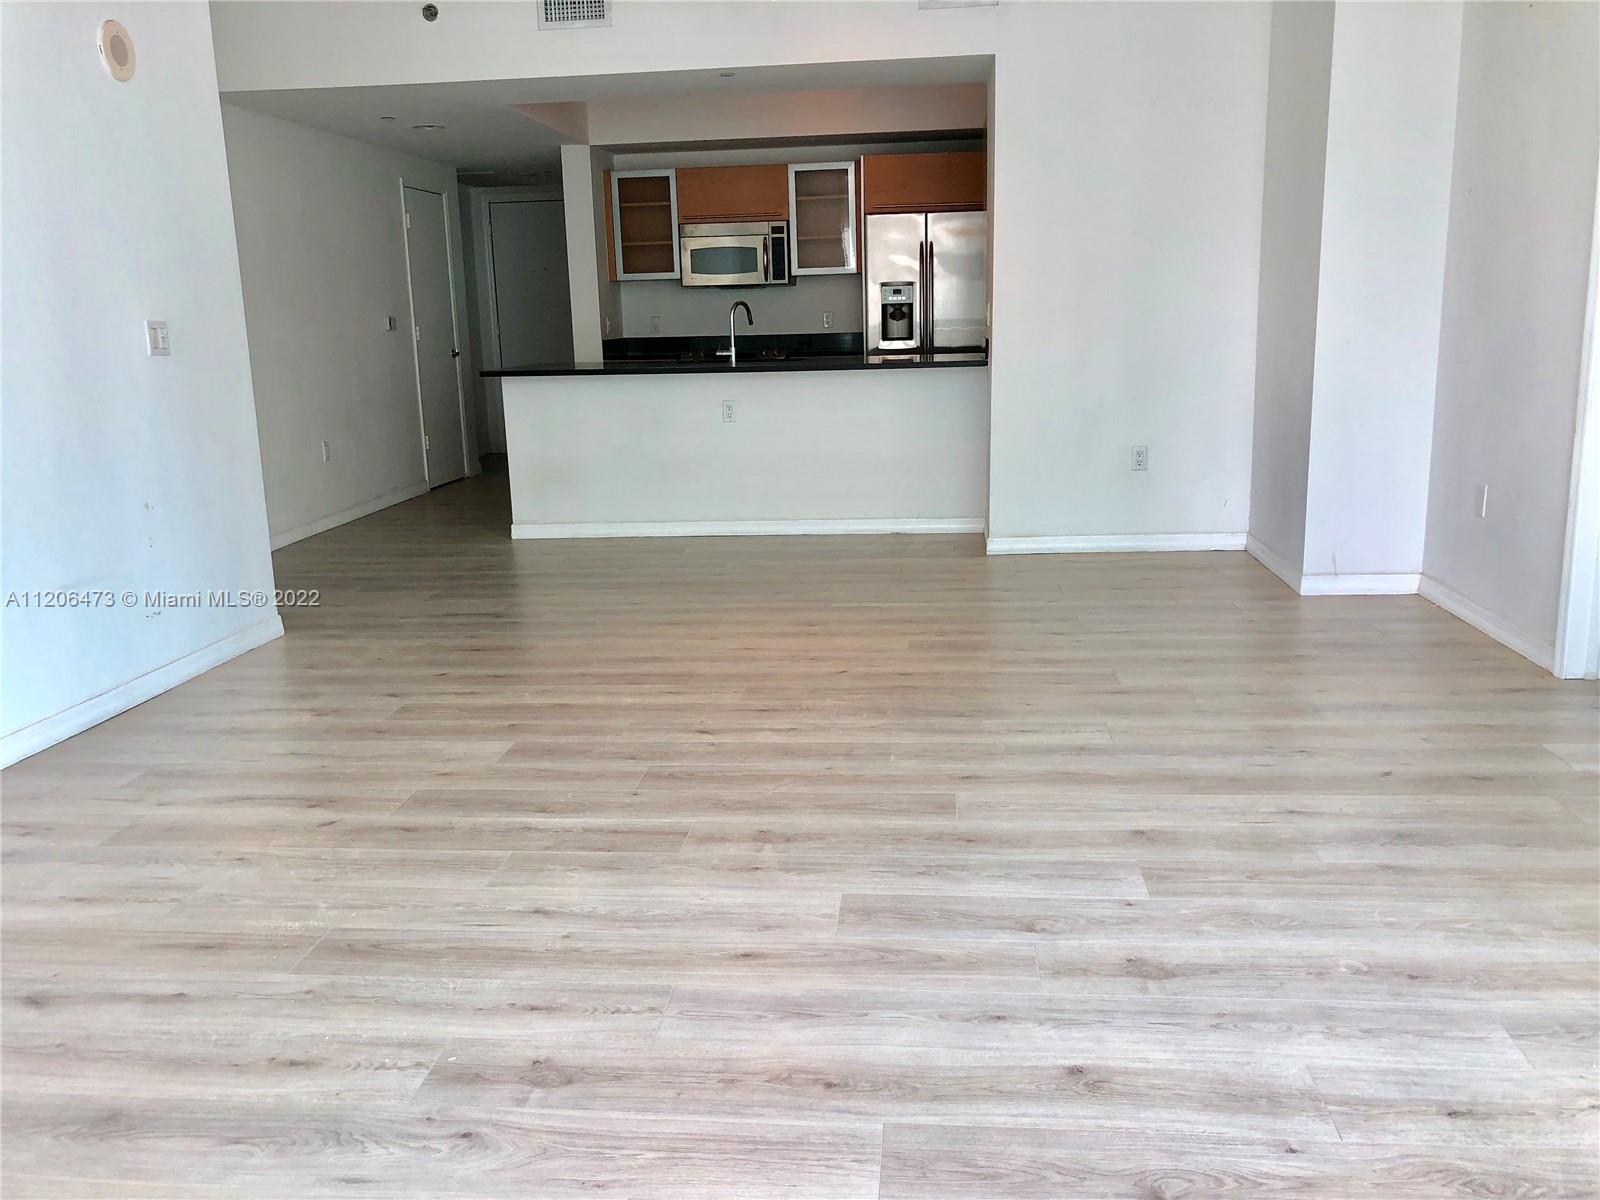 2 PARKINGS !!     2 Bed / 2. 5 bath corner unit with laminated wood floors throughout . This is the 